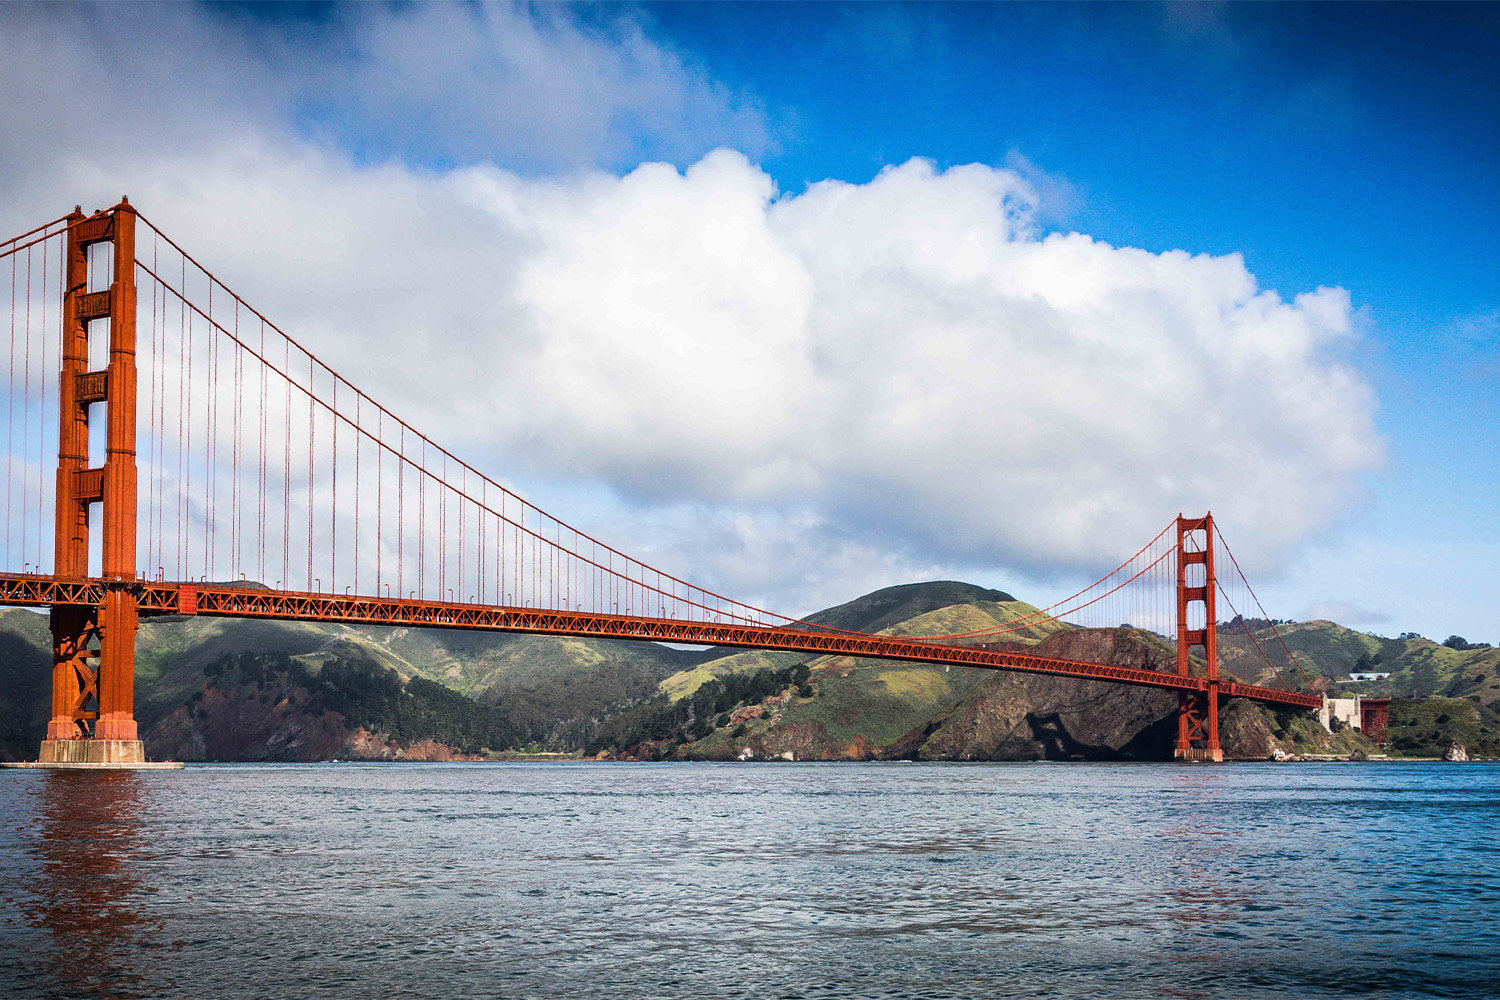 A Brief History of Photographing the Golden Gate Bridge